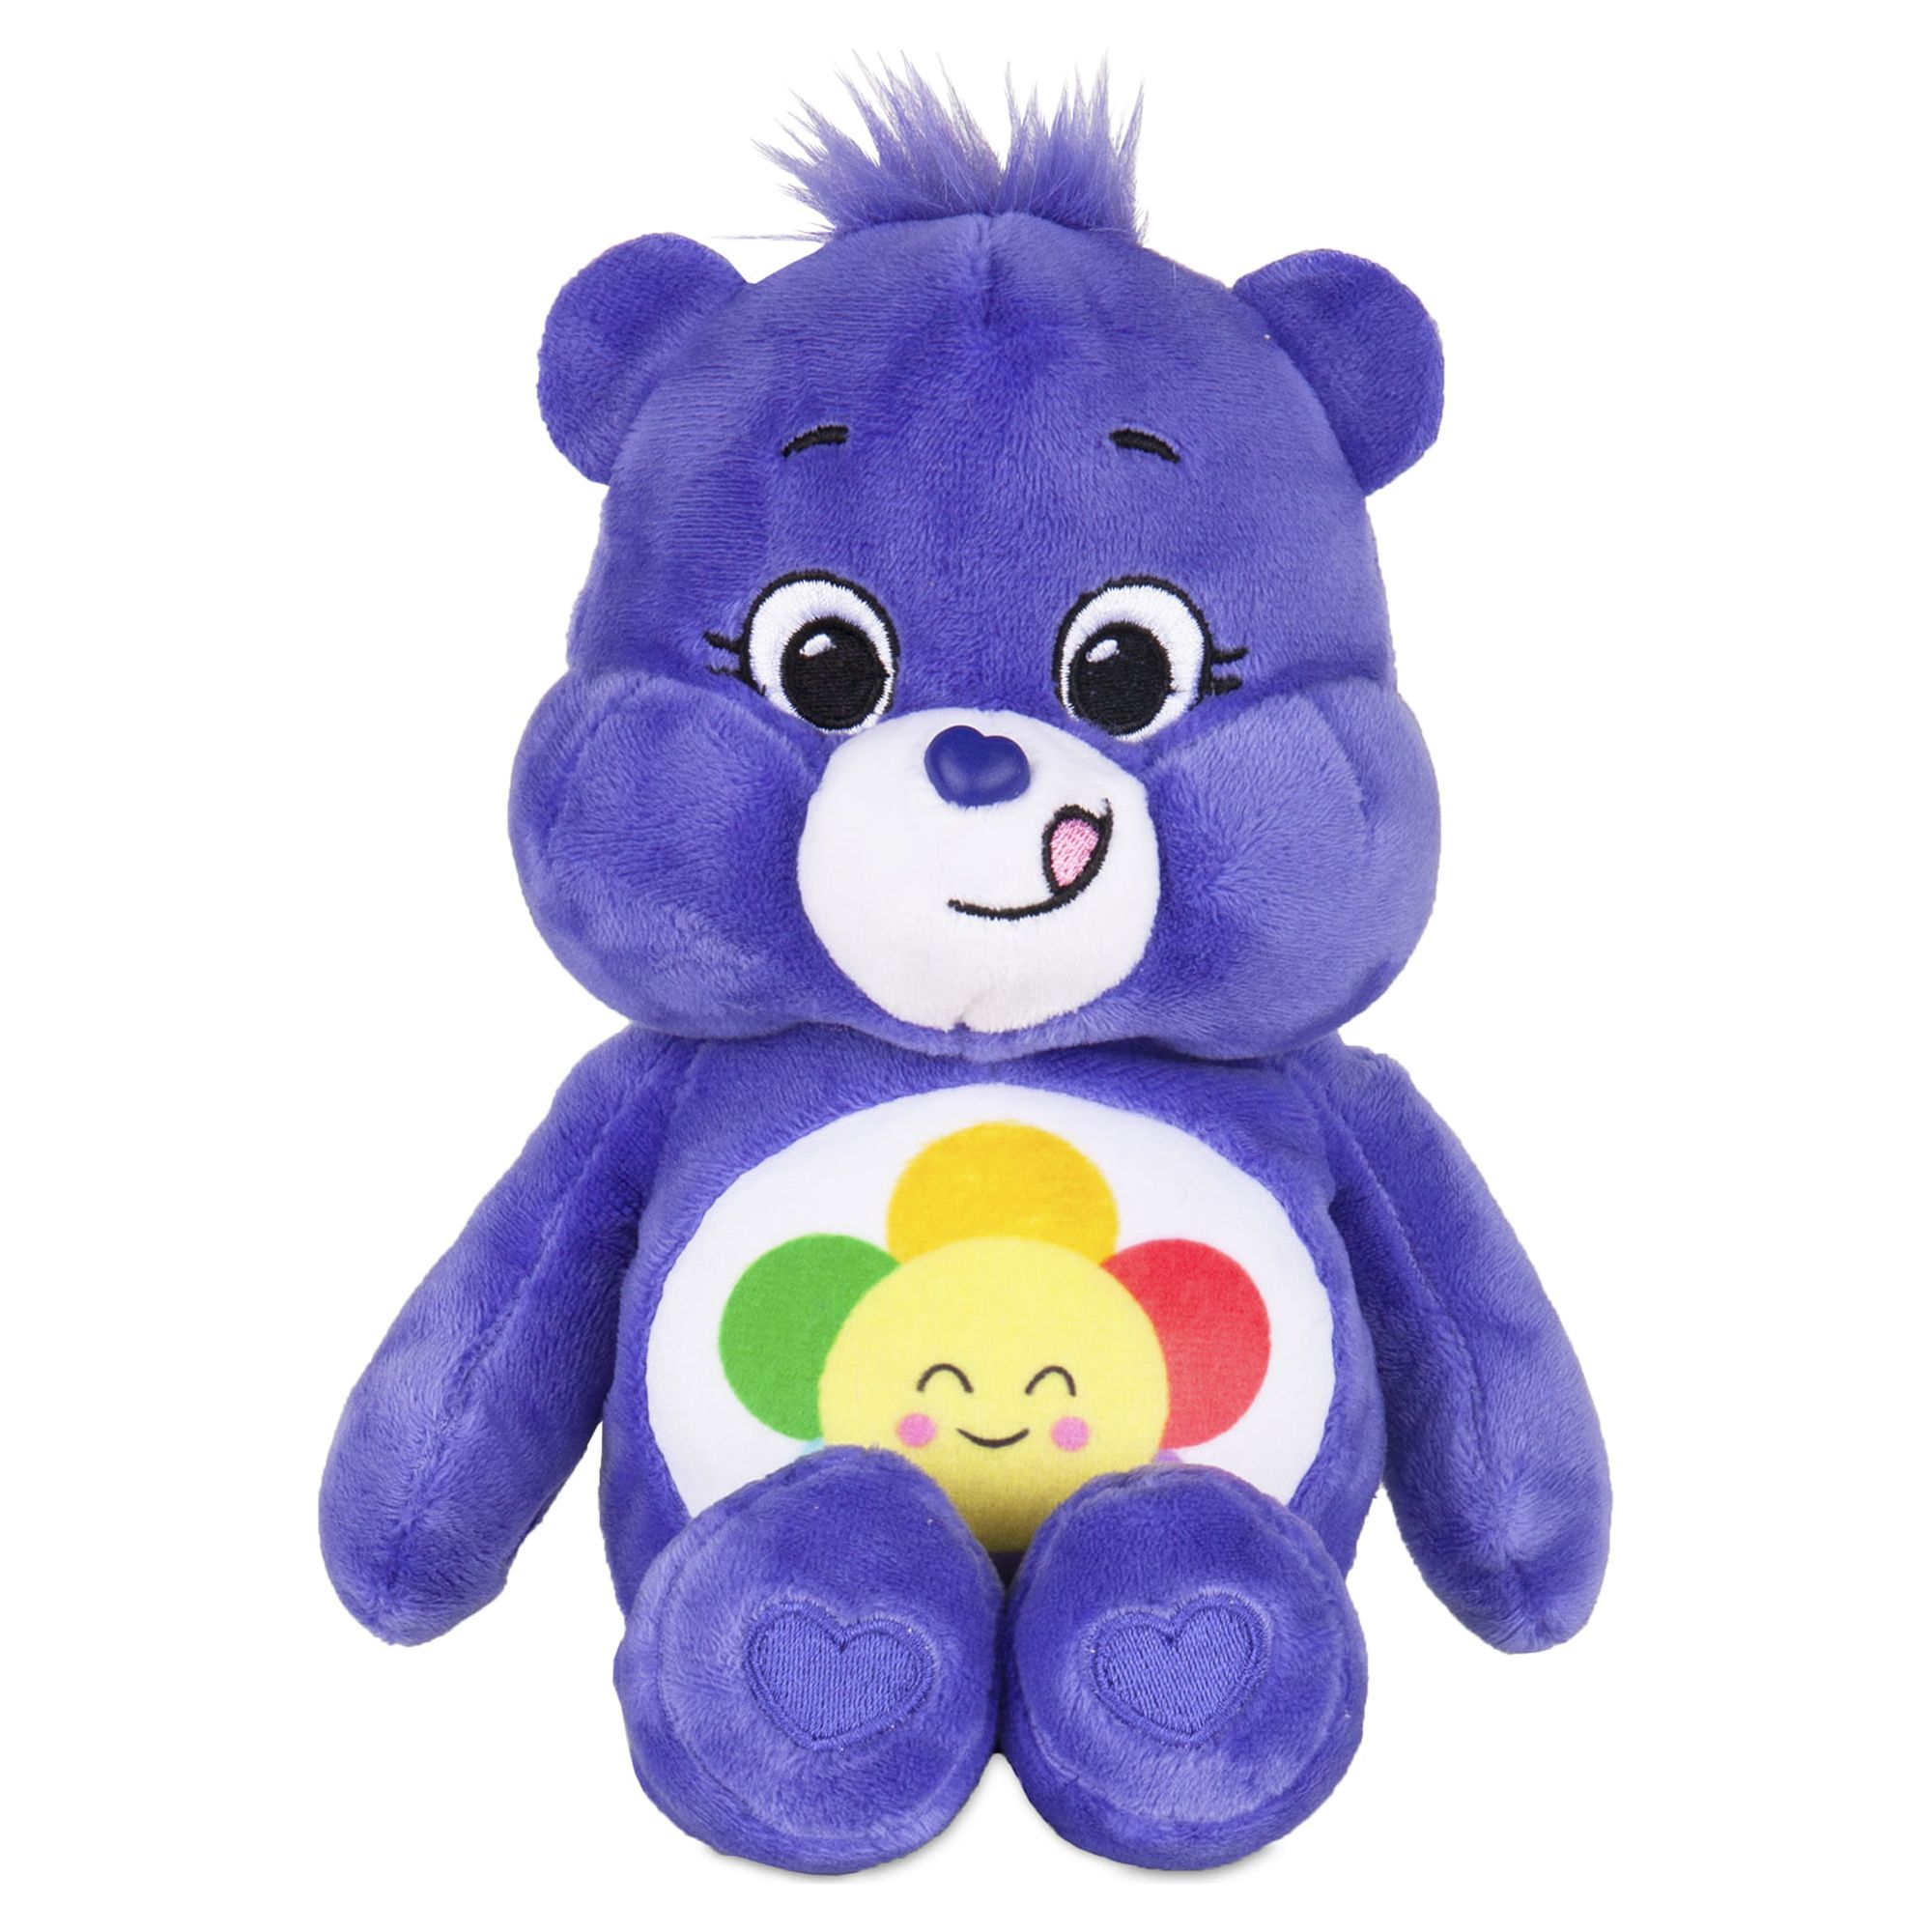 Care Bears - 9" Bean Plush - Special Collector Set - Exclusive Harmony Bear Included! - image 4 of 9